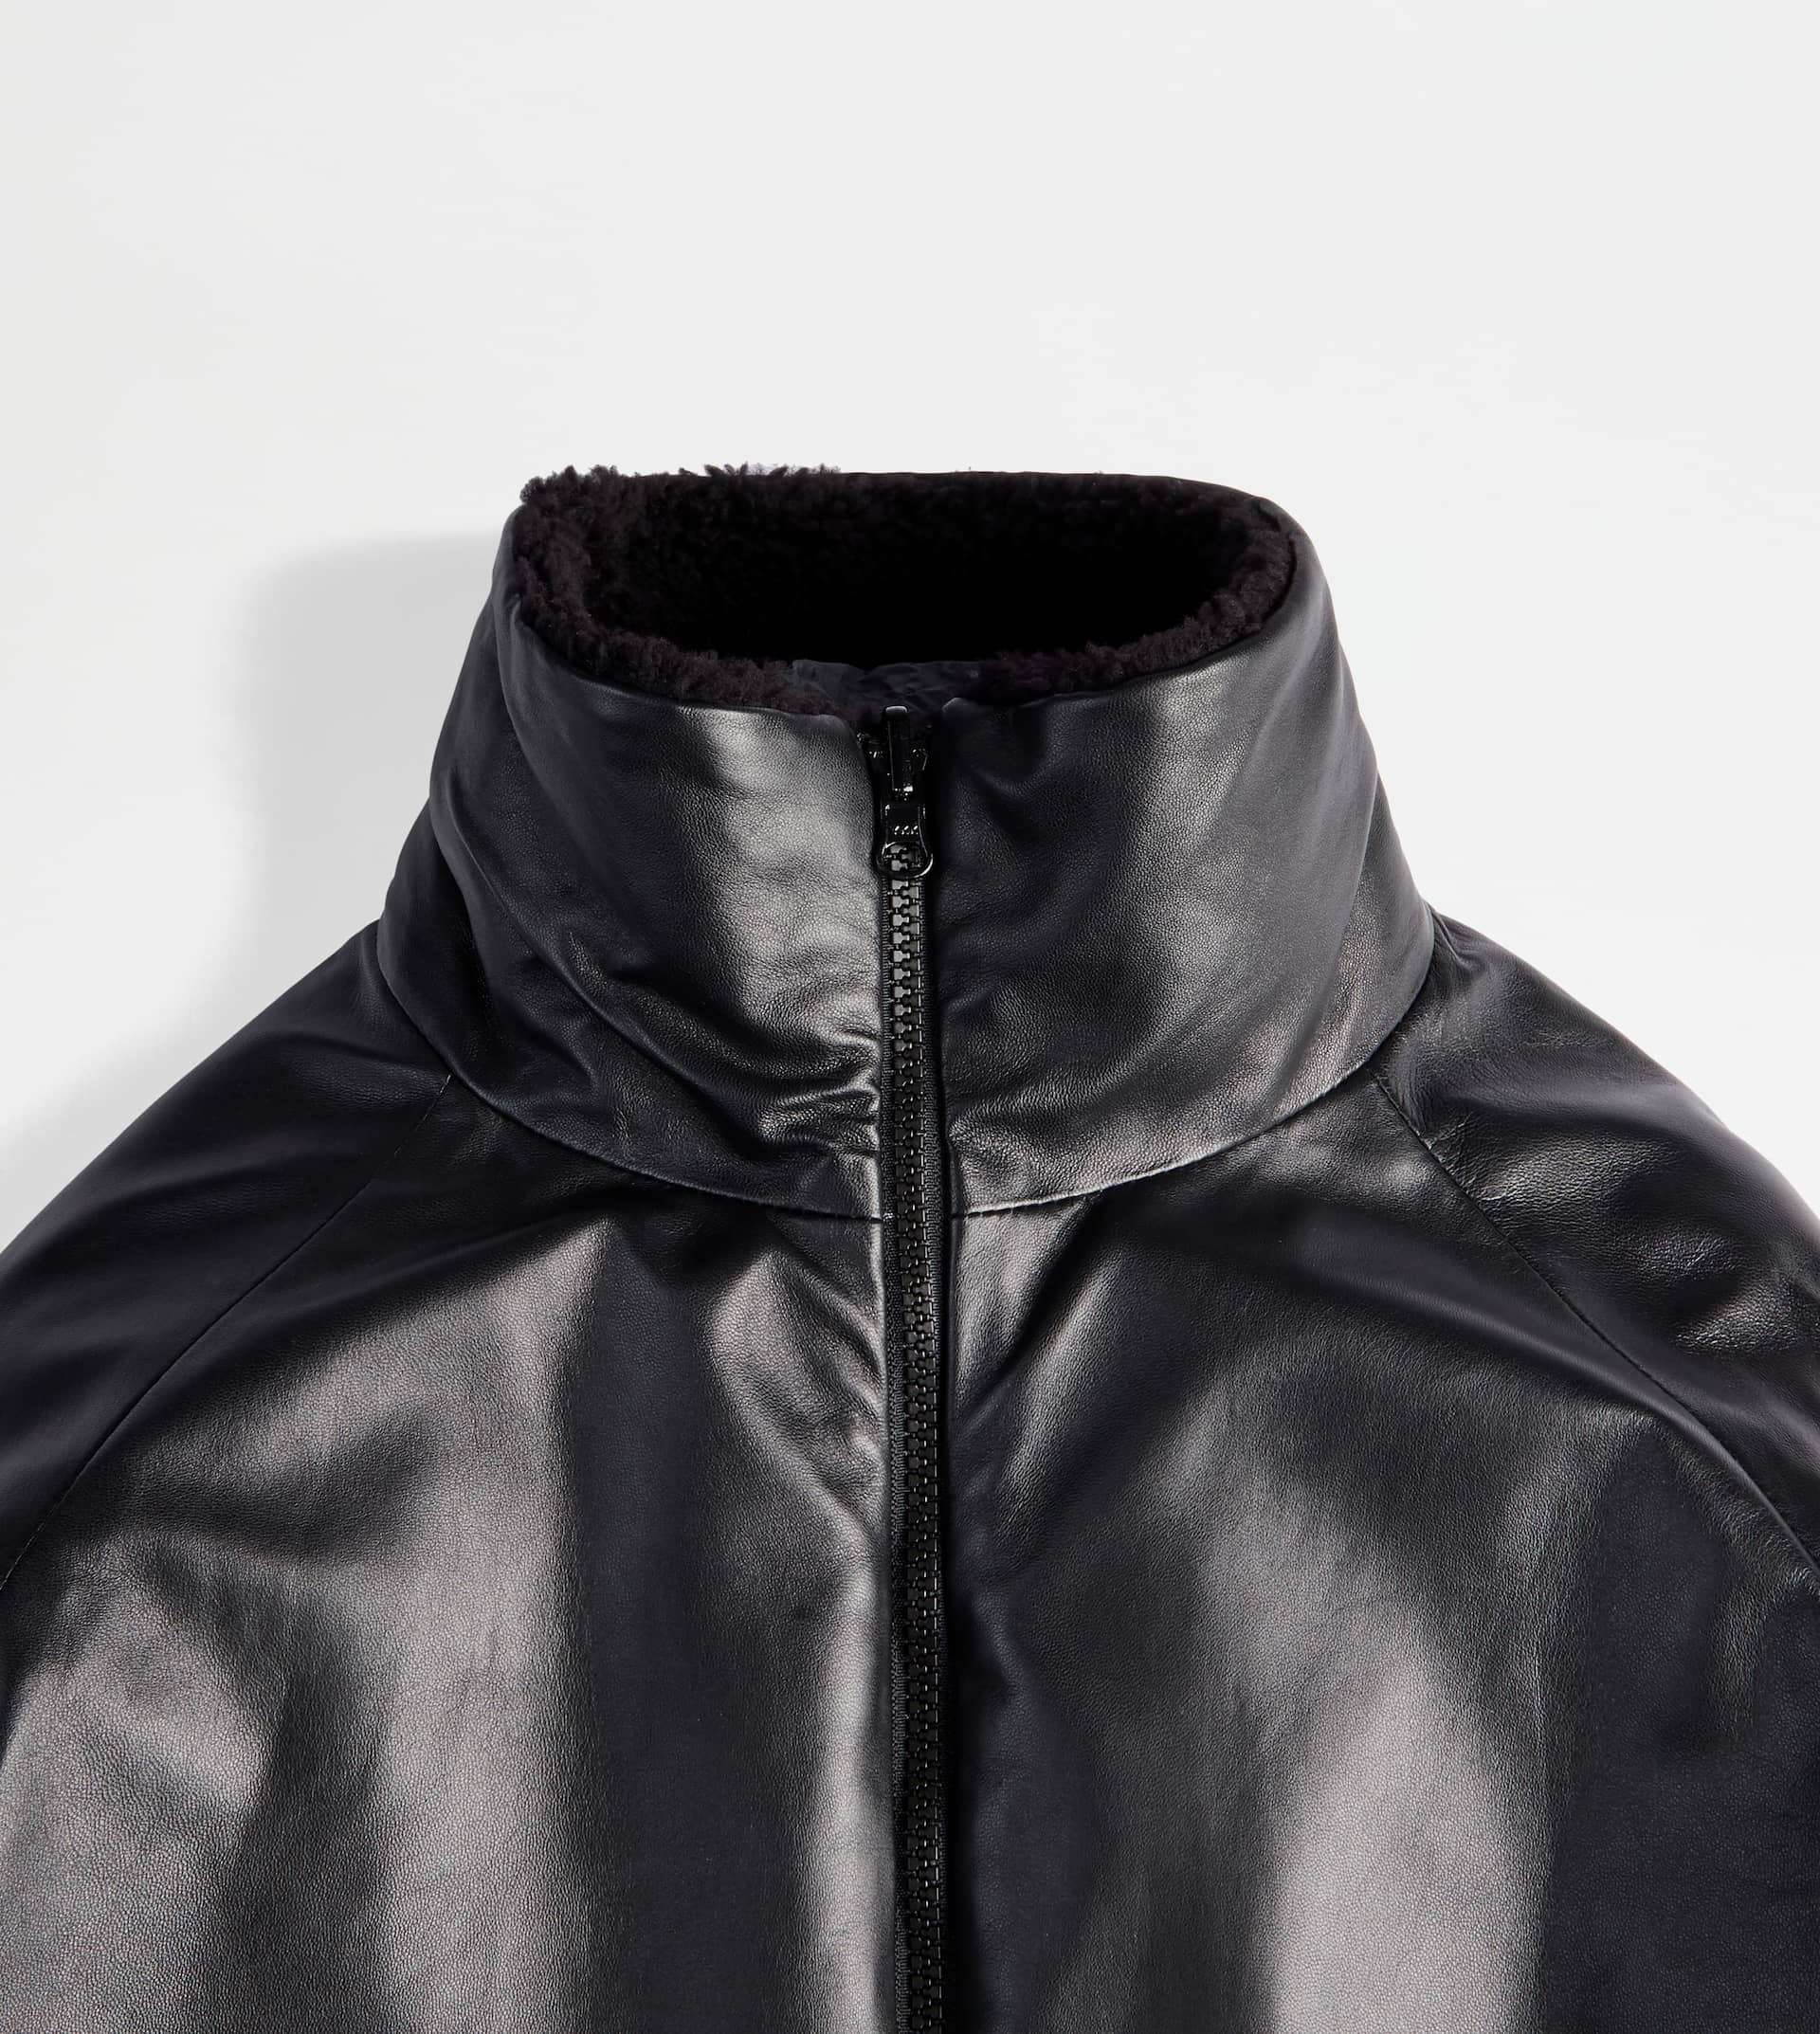 TOD'S BOMBER JACKET IN LEATHER - BLACK - 9